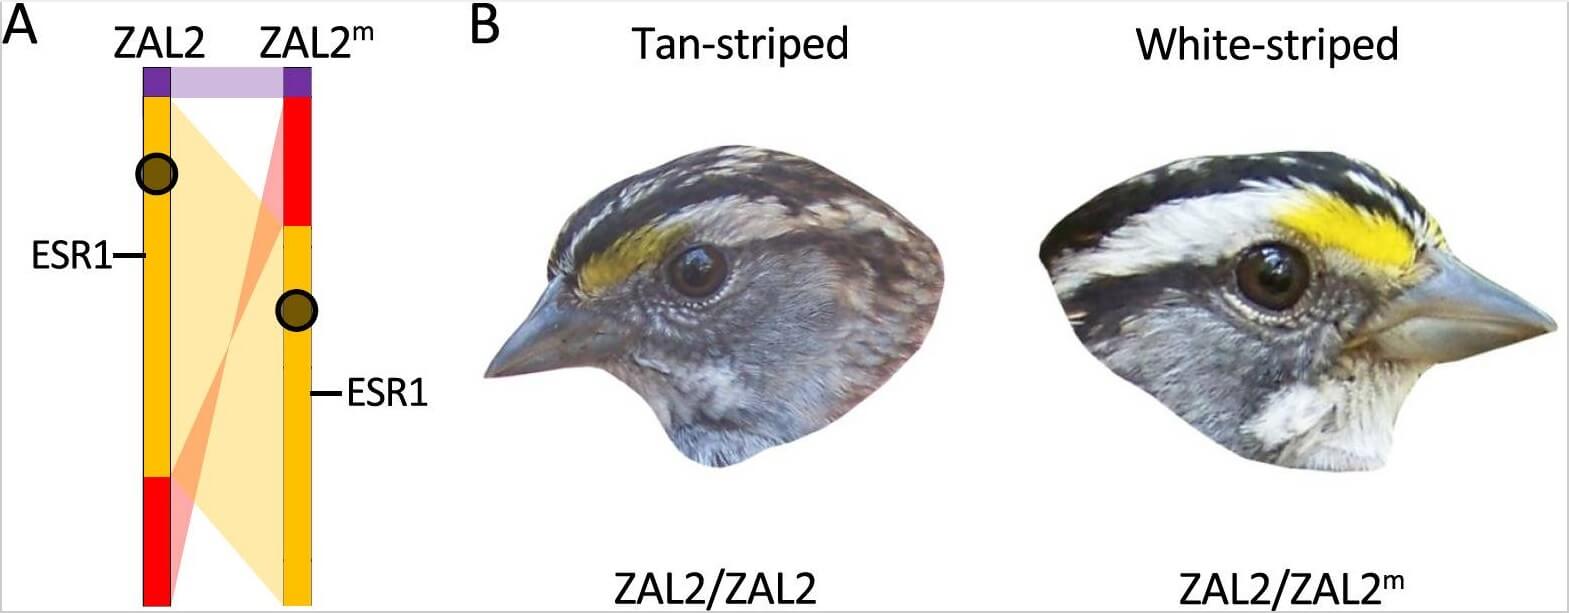 The supergene region and the two color morphs of white-throated sparrows